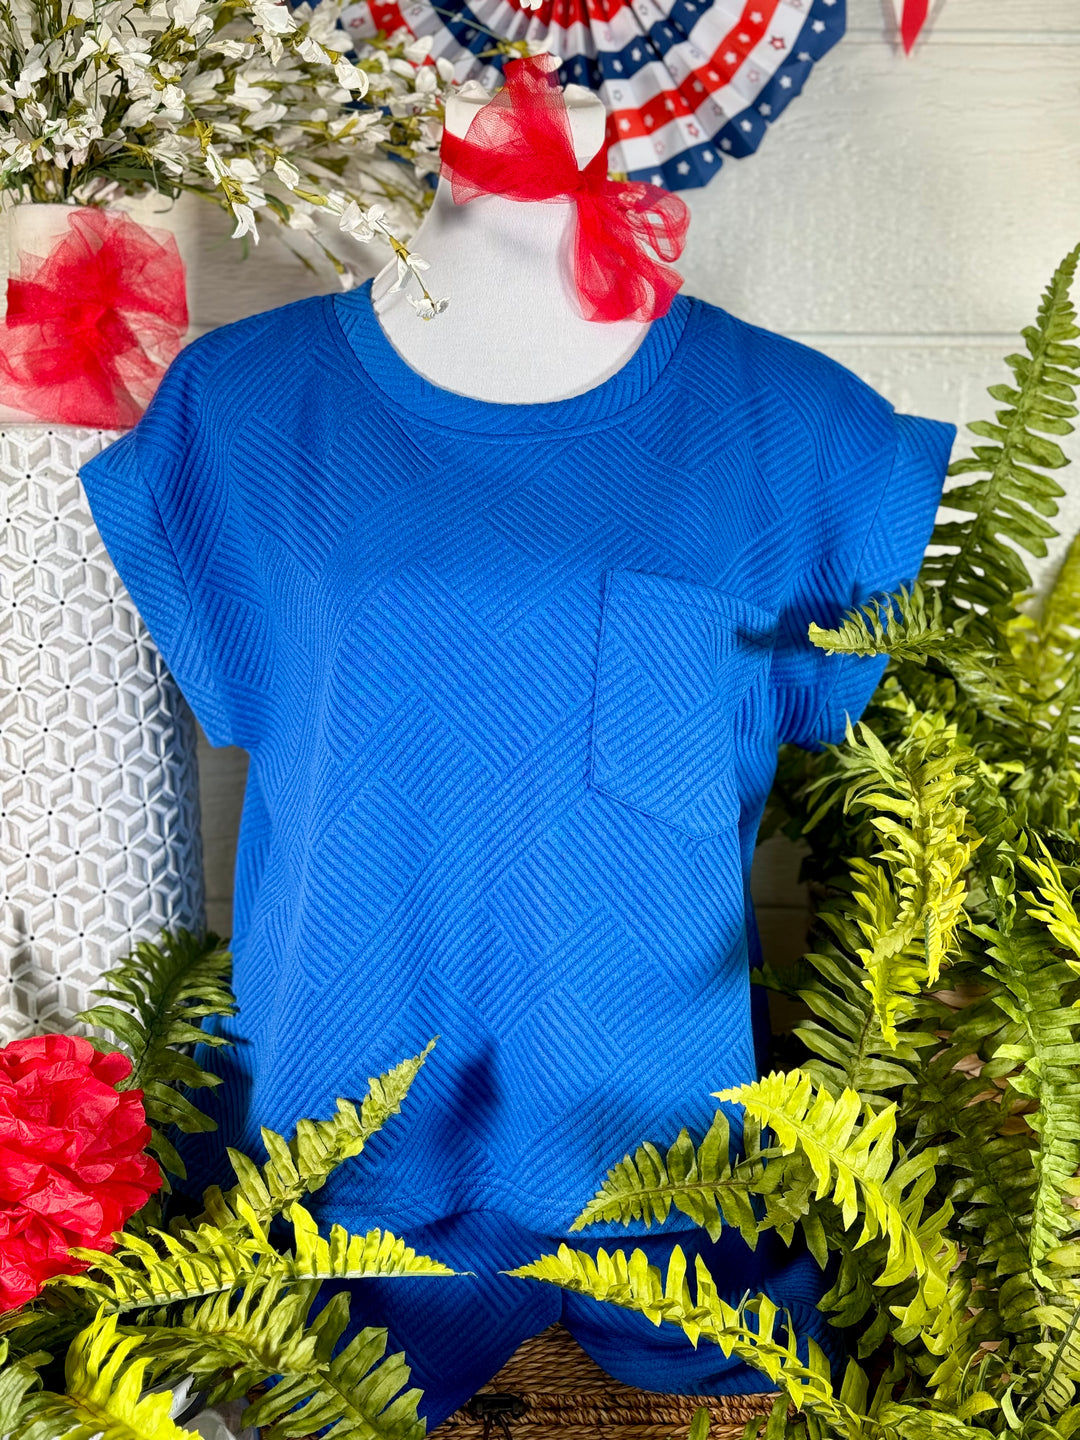 RESTOCKED: Knit Round Neck Short Sleeve Top - 5 Color Options - Final Sale